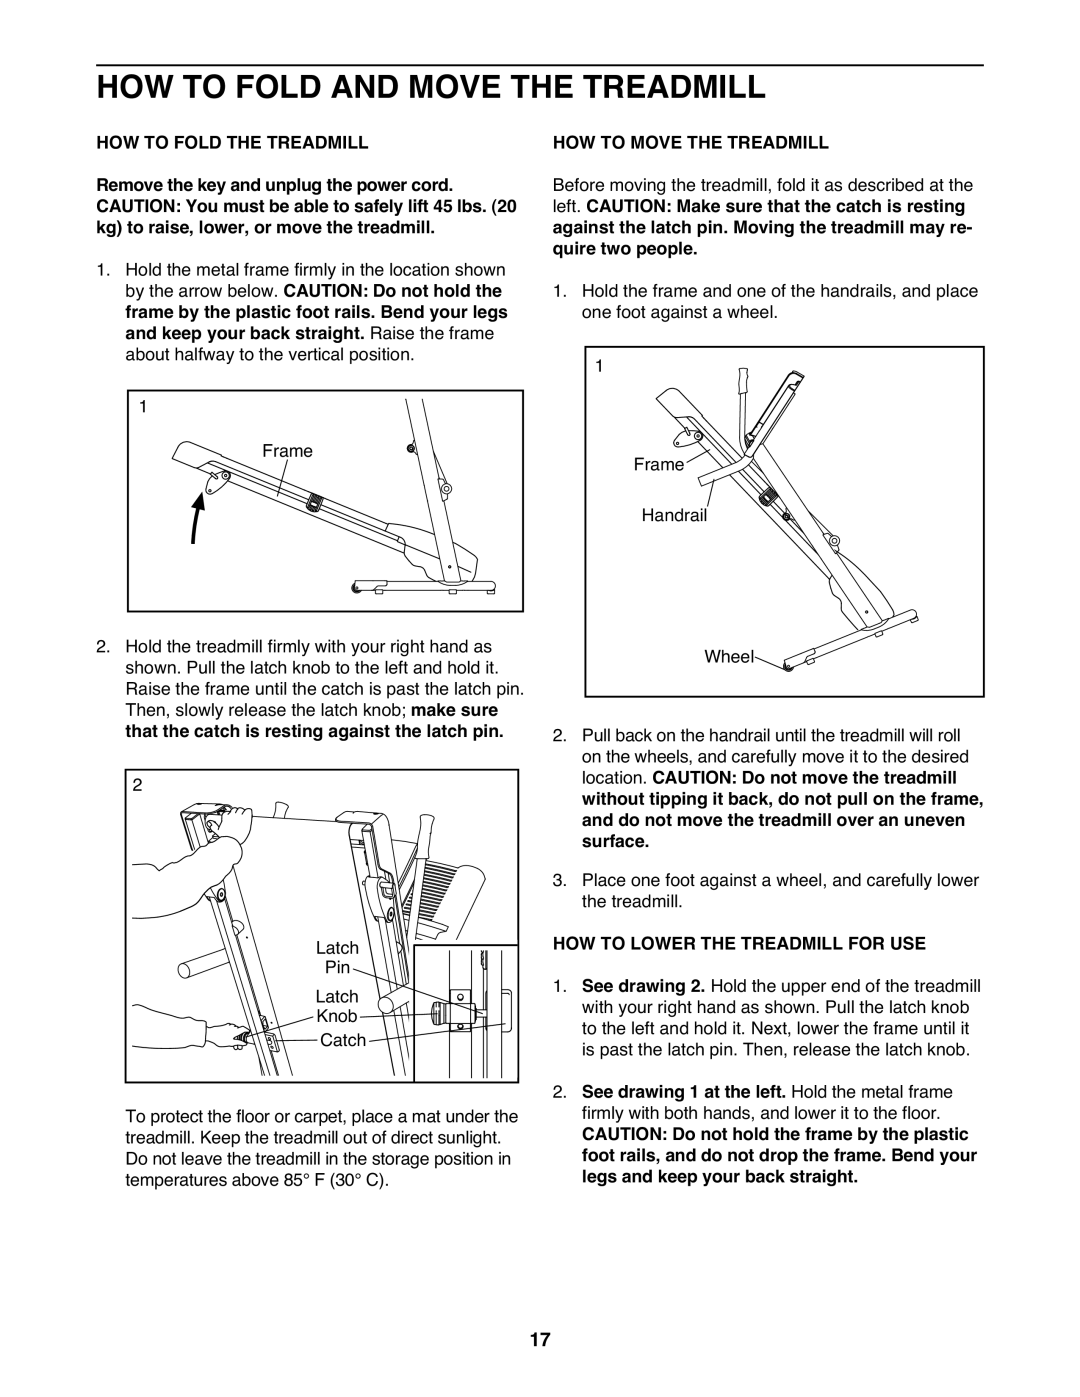 Weslo 831.24822.0 manual HOW to Fold and Move the Treadmill, HOW to Fold the Treadmill, HOW to Move the Treadmill 